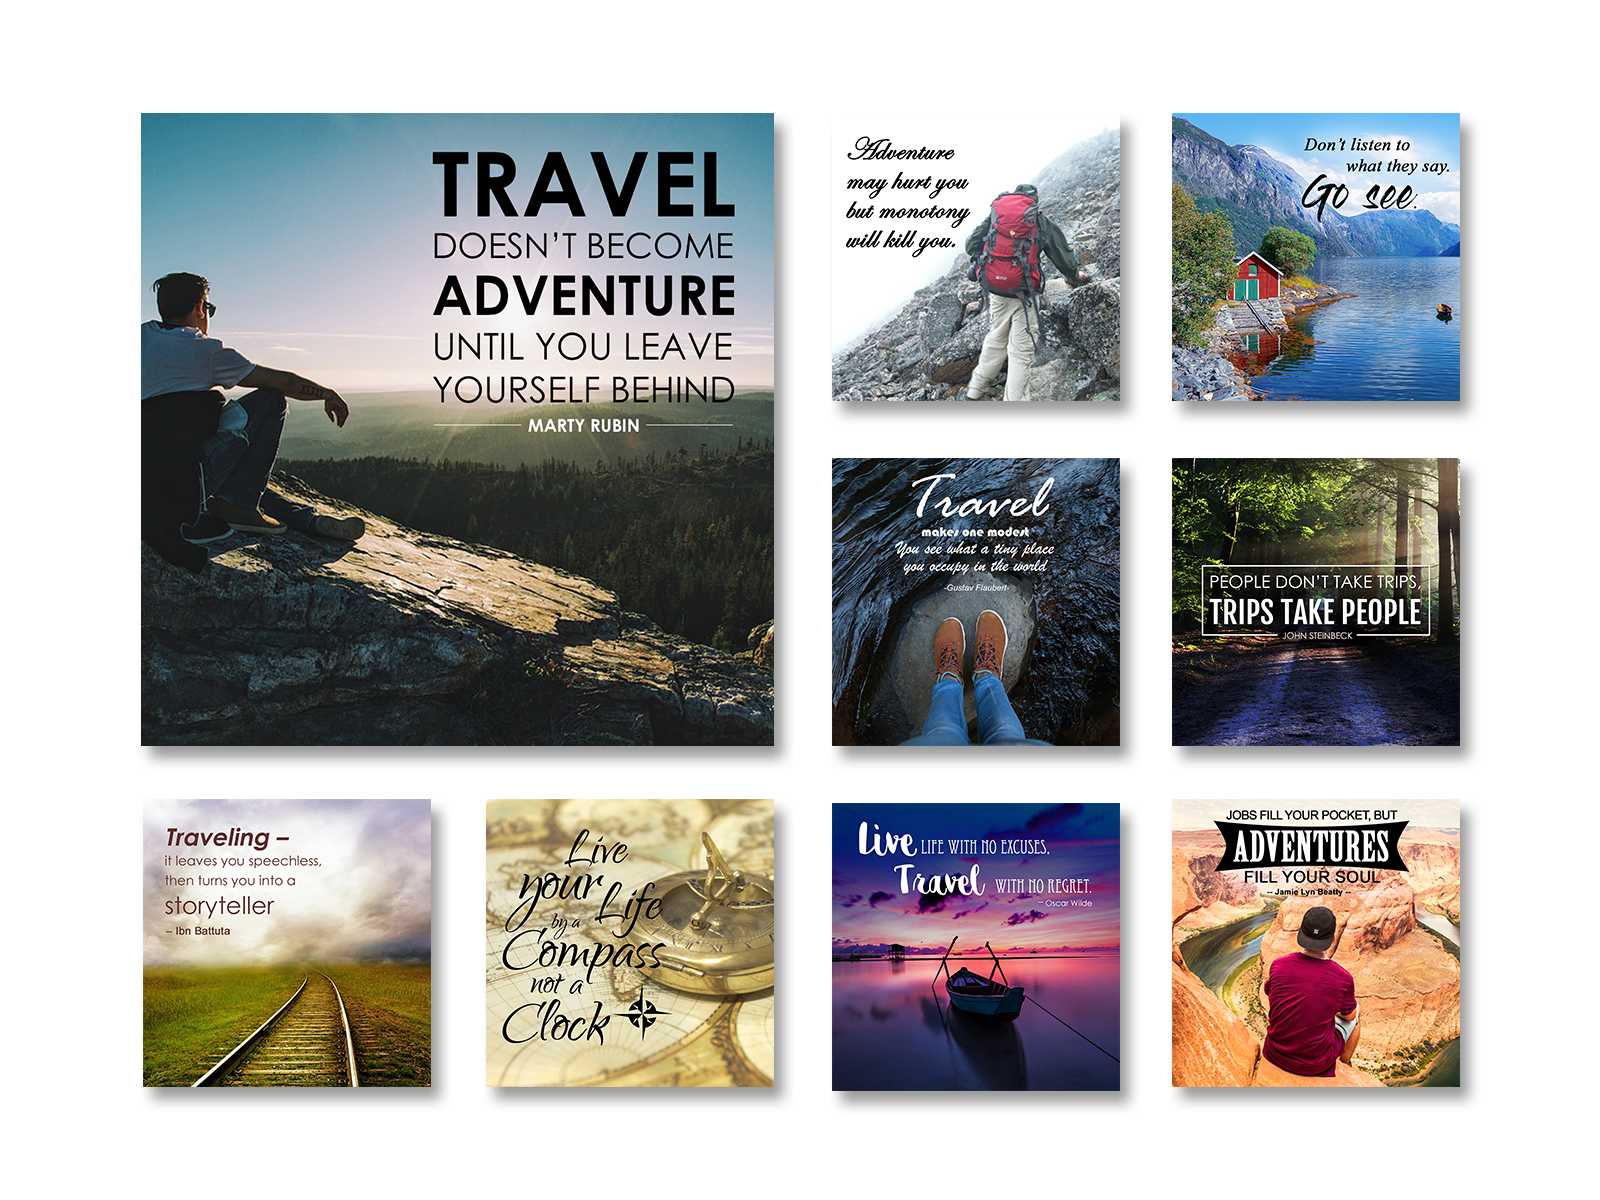 Travel Quote Banner Designs by Pardeep Sharma on Dribbble